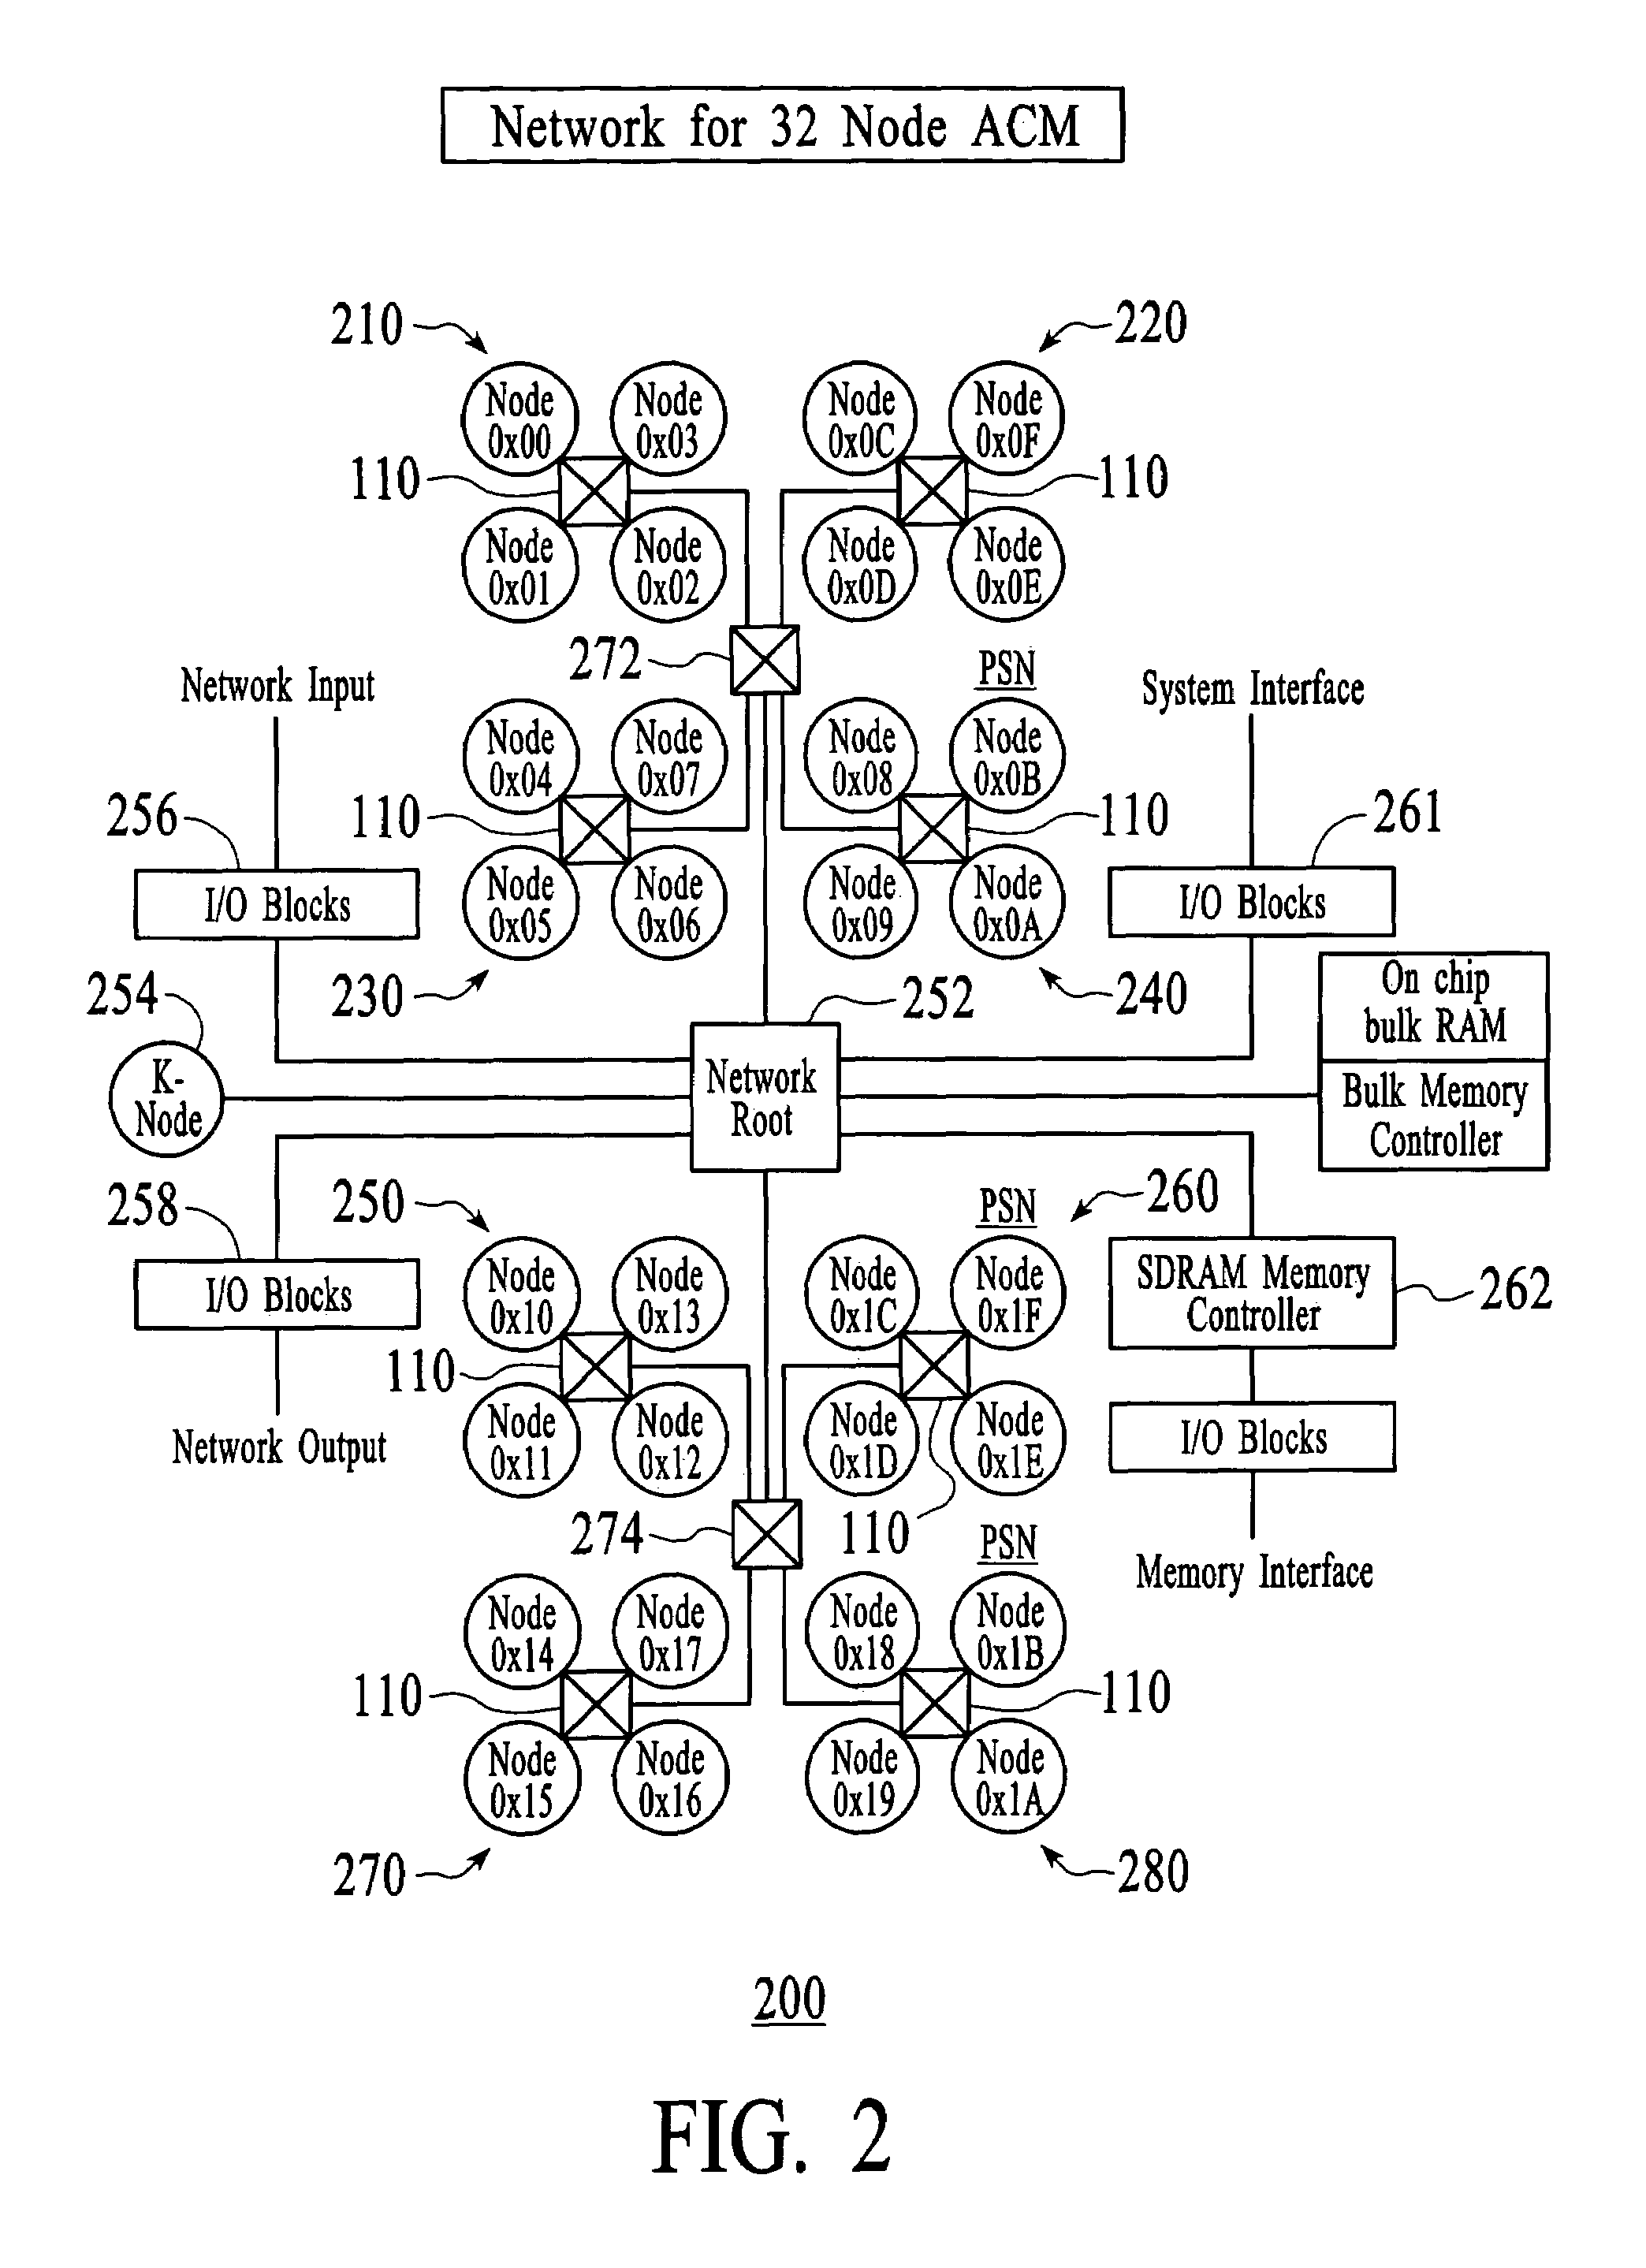 Method and system for reducing the time-to-market concerns for embedded system design